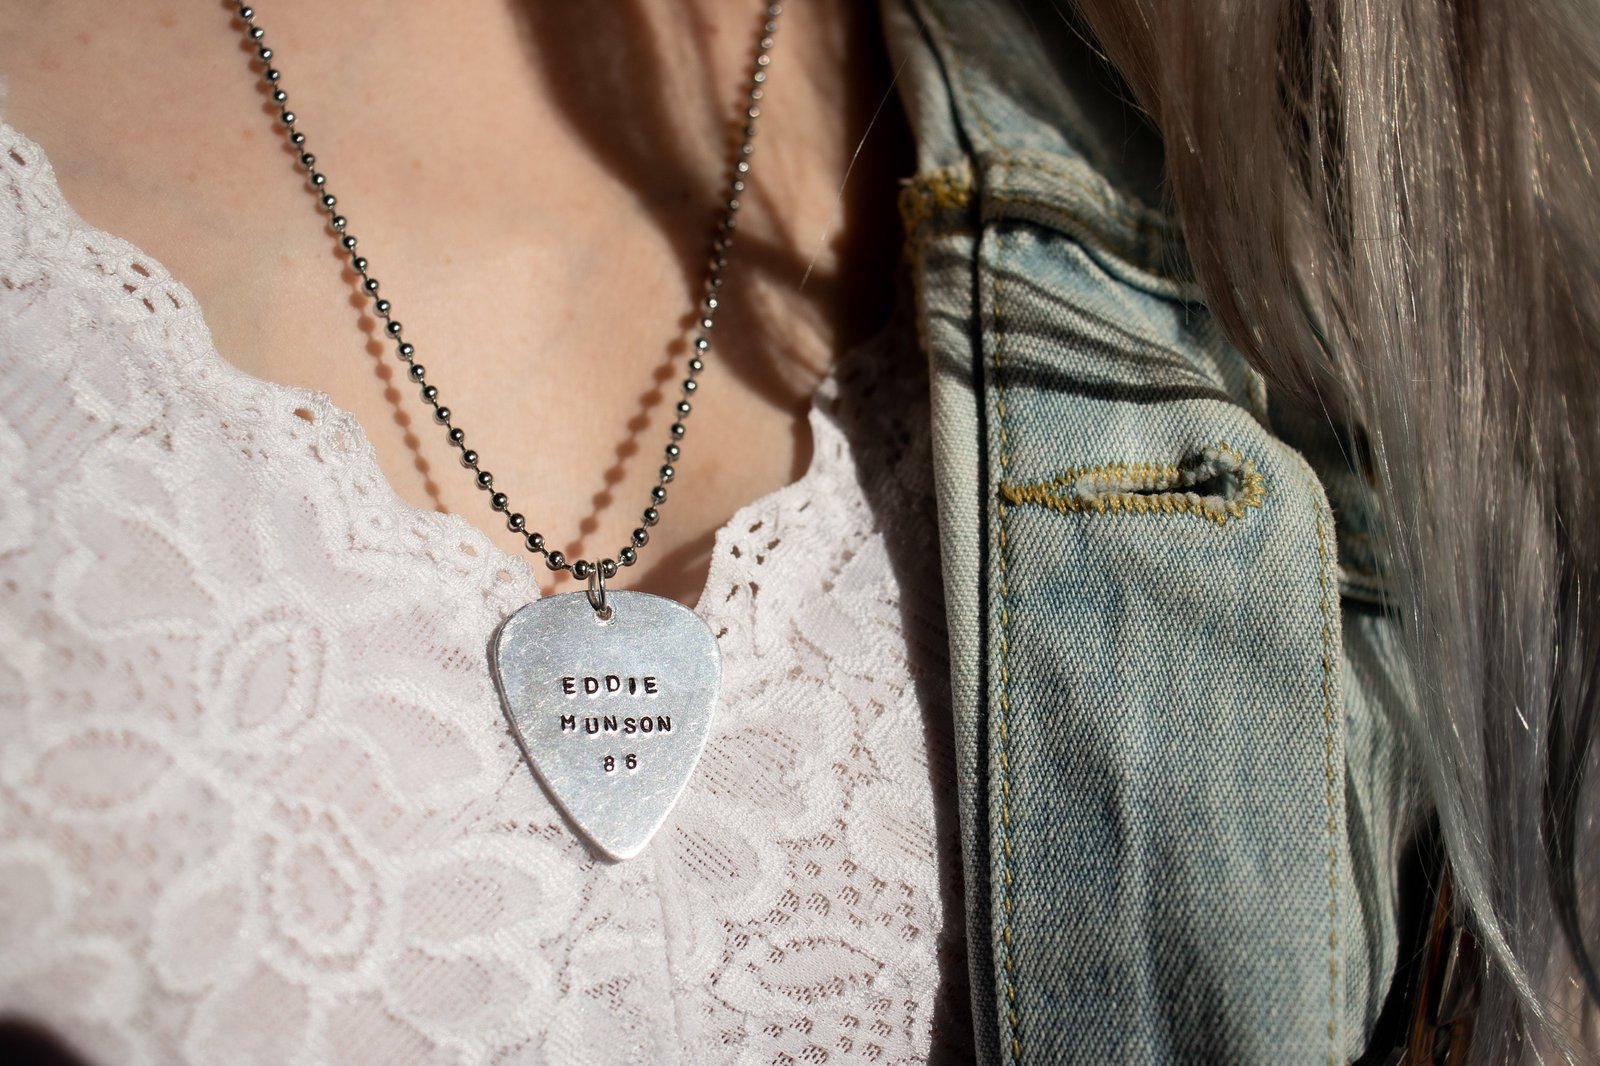 eddie munson guitar pick necklace | AUsagg Hellfire Club Eddie Munson Necklace  Eddie Munson Guitar Pick Necklace Jewelry For Women or Men-Red